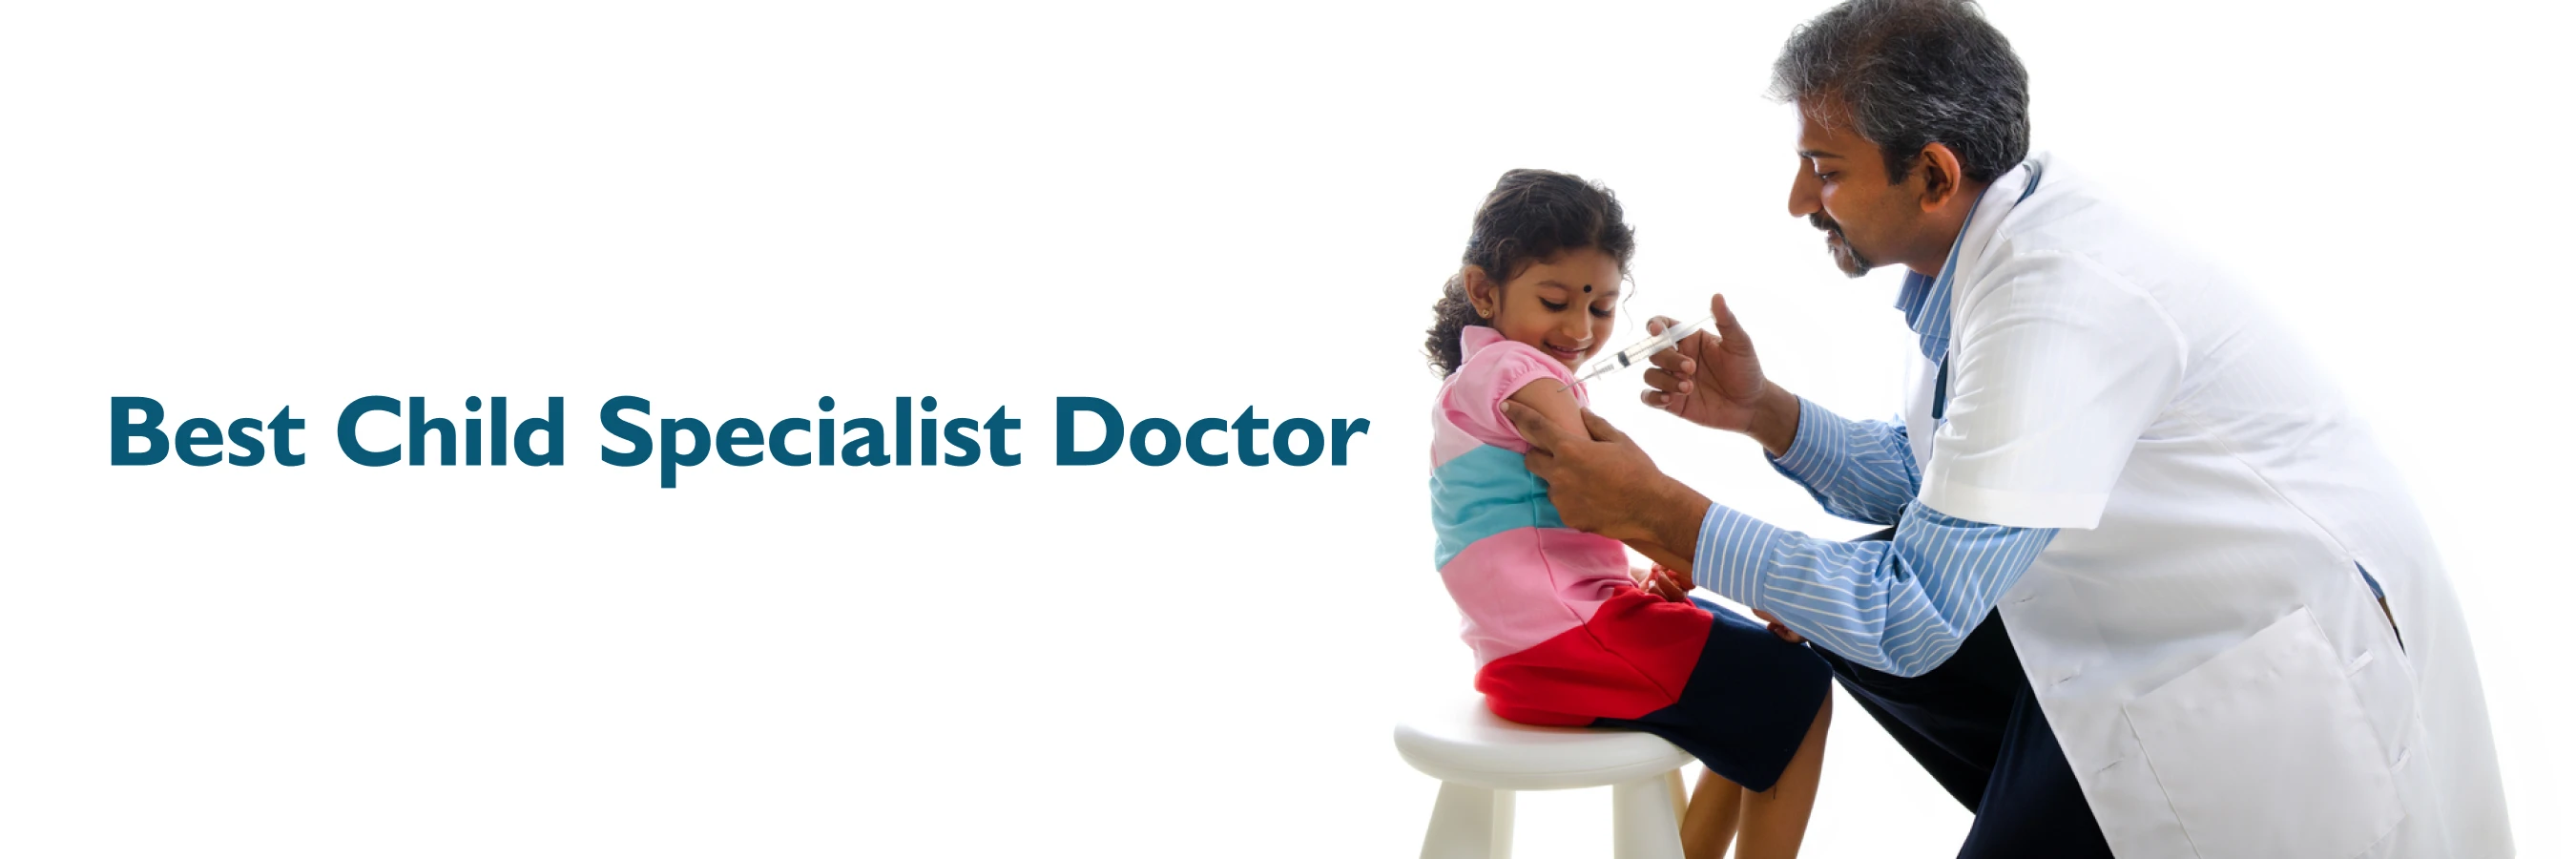 Child Specialist Doctor Near Me